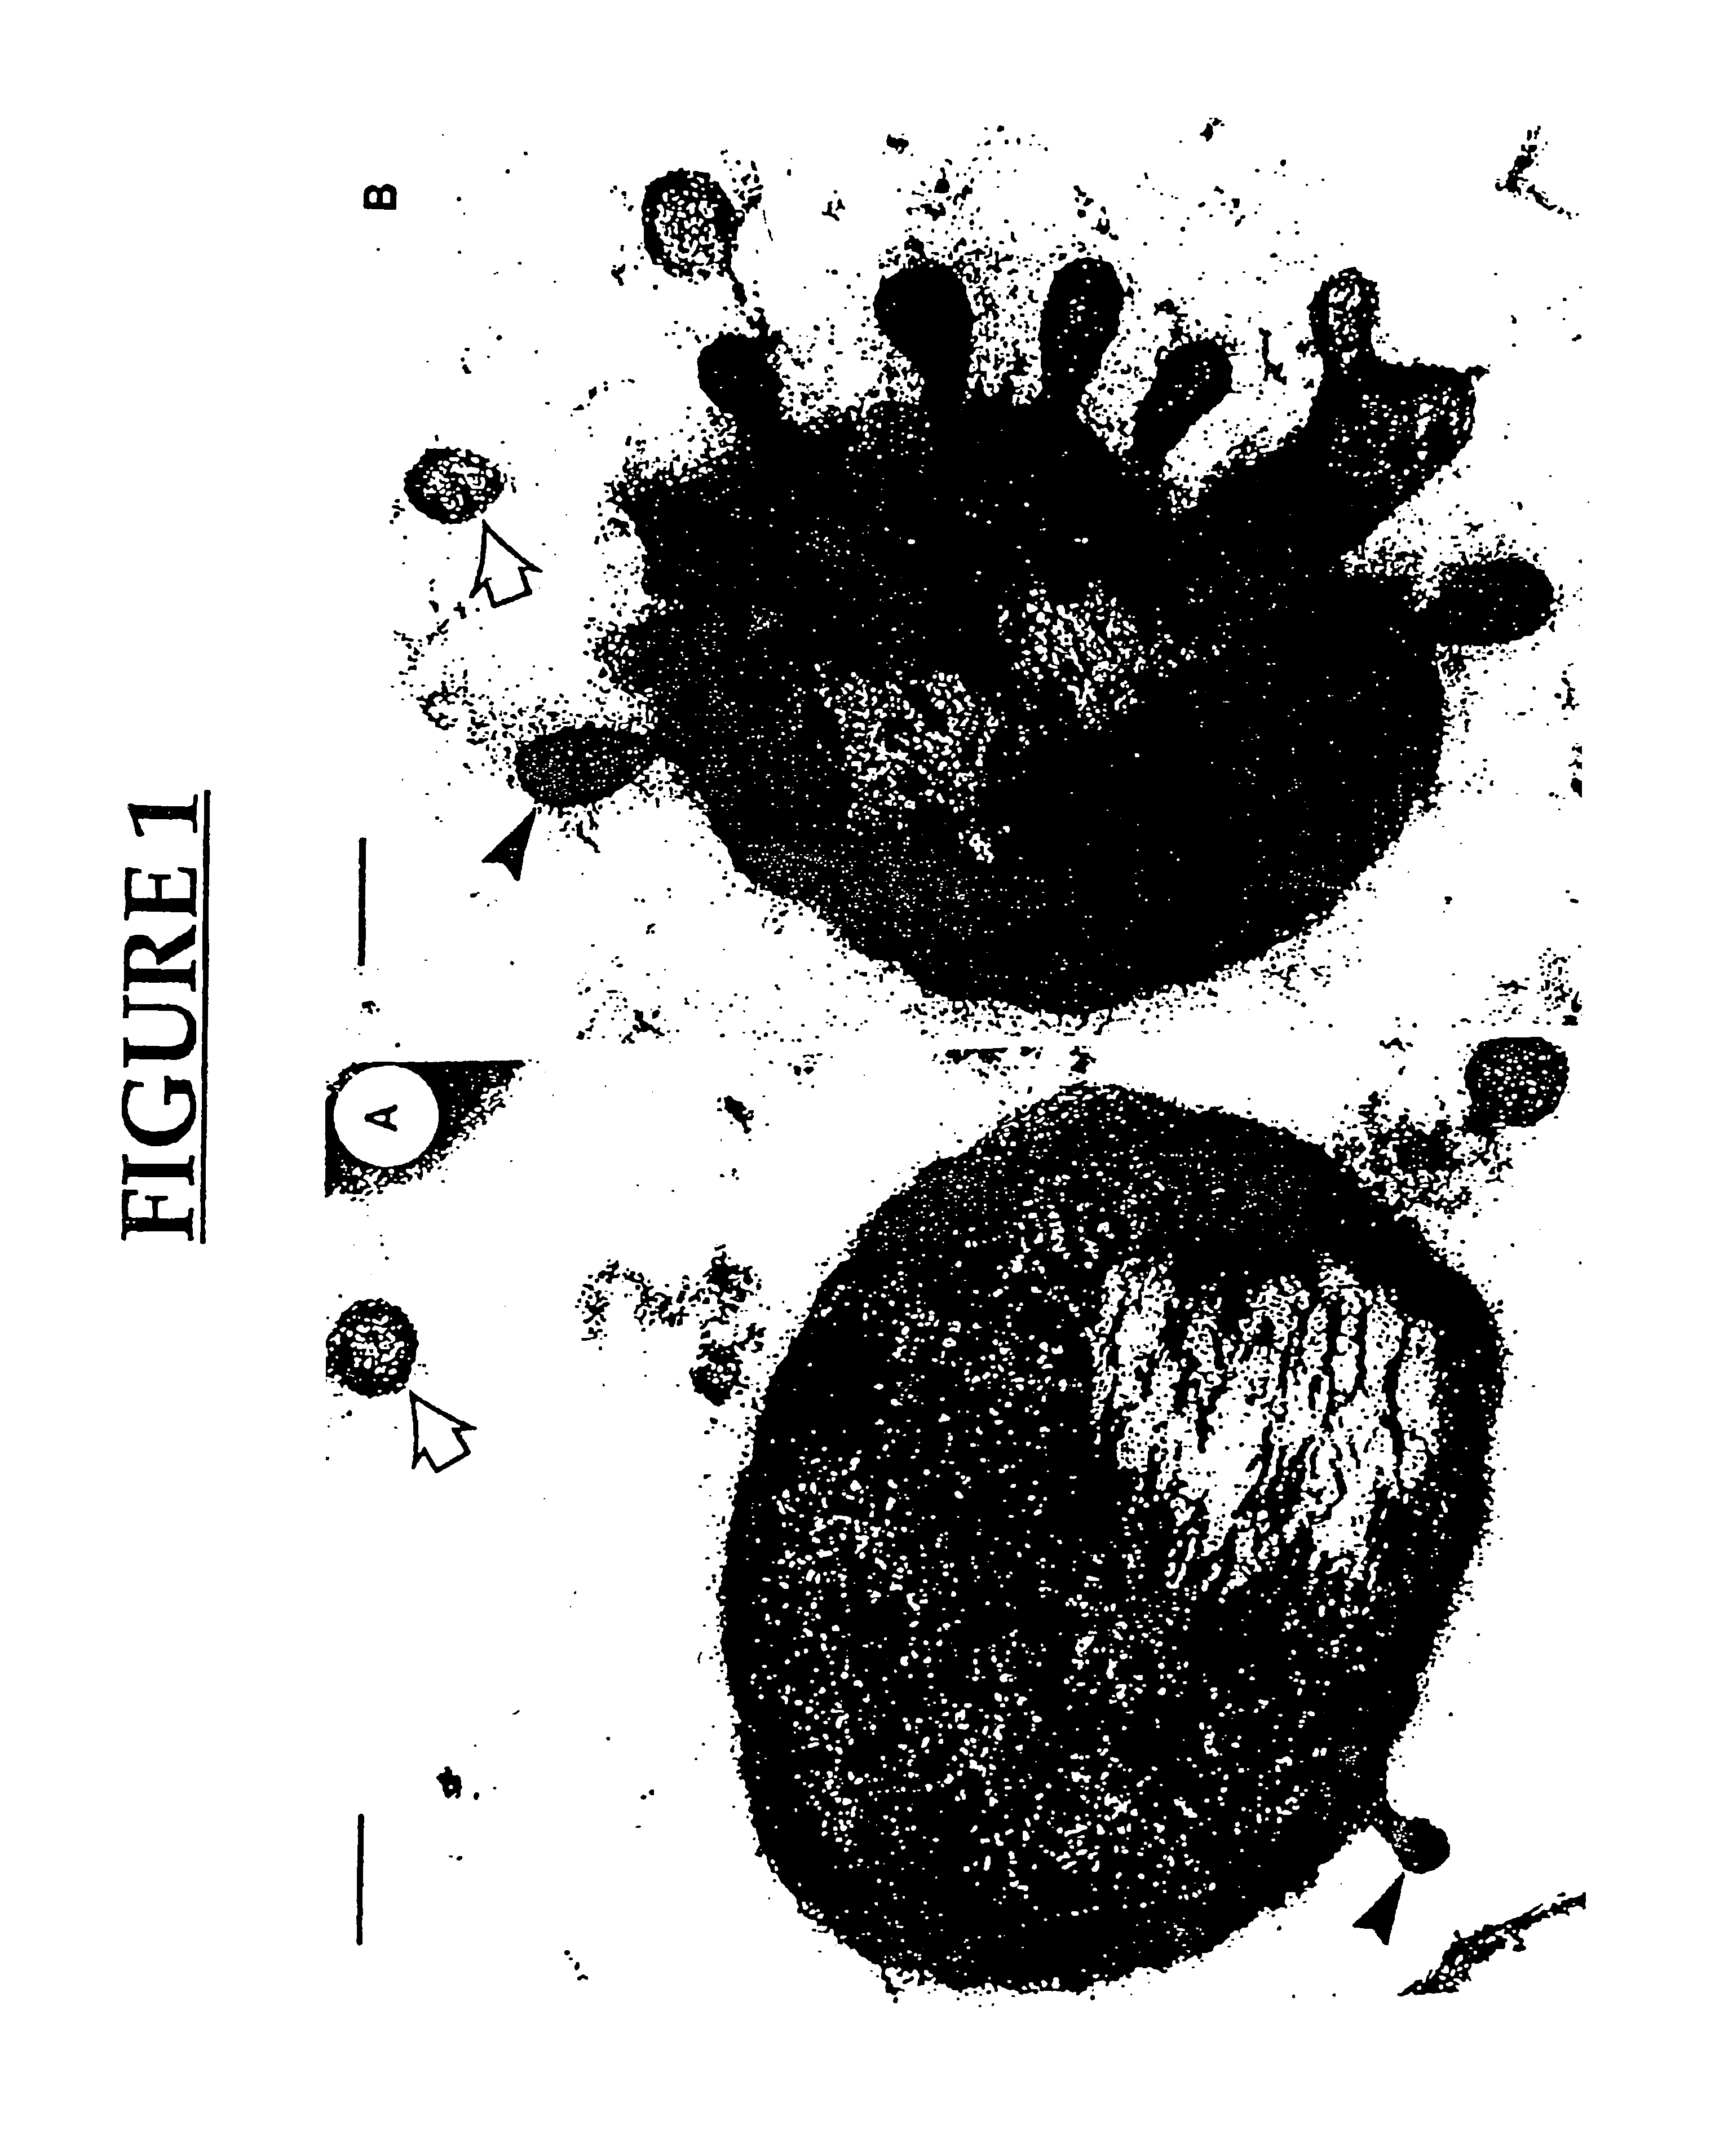 Vaccines and pharmaceutical compositions using membrane vesicles of microorganisms, and methods for preparing same